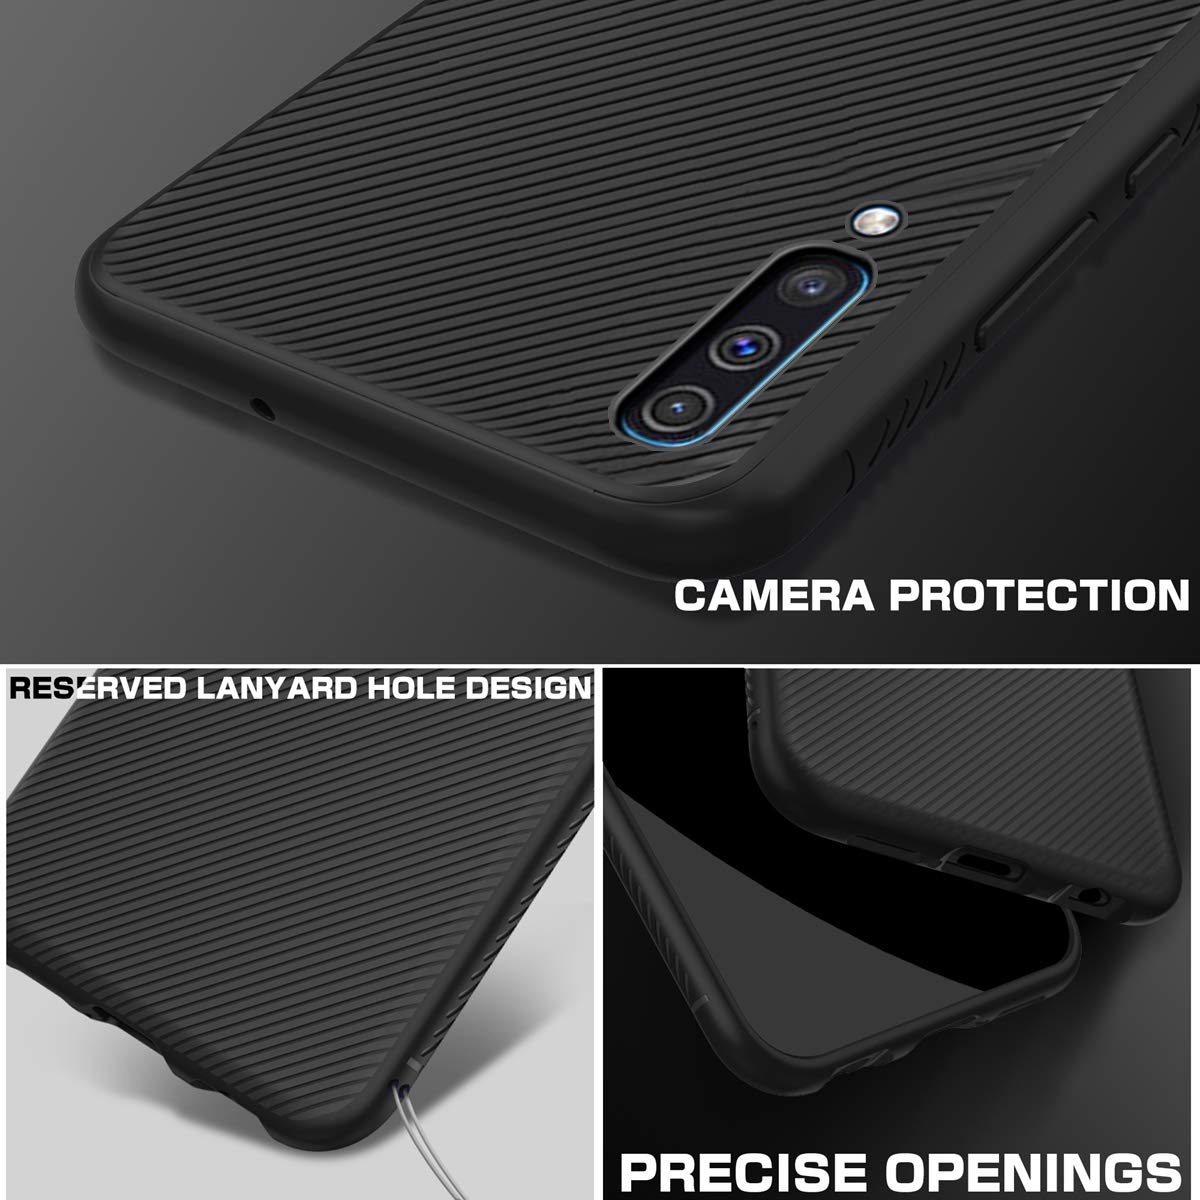 Bakeey Carbon Fiber Protective Case For Samsung Galaxy A50 2019 Shockproof Soft TPU Back Cover